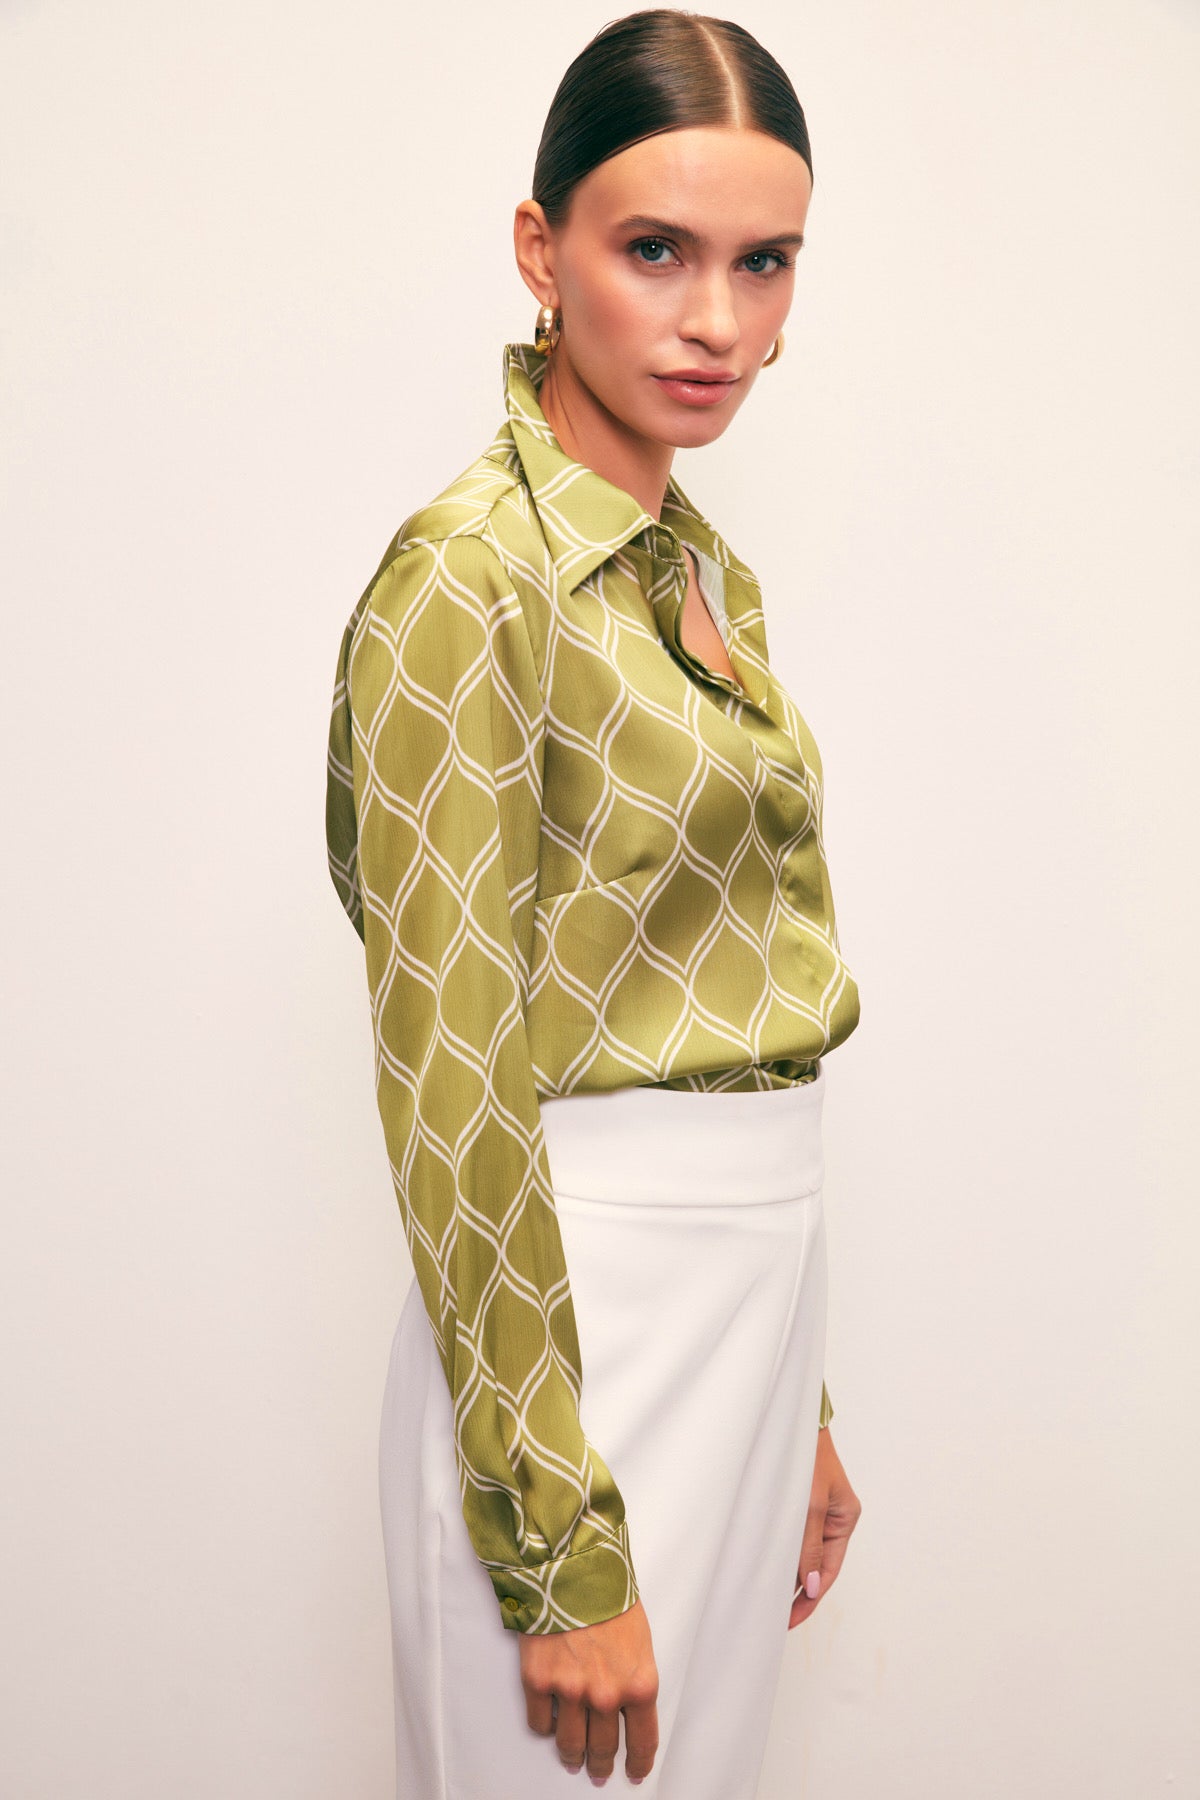 Patterned Classic Shirt - Green